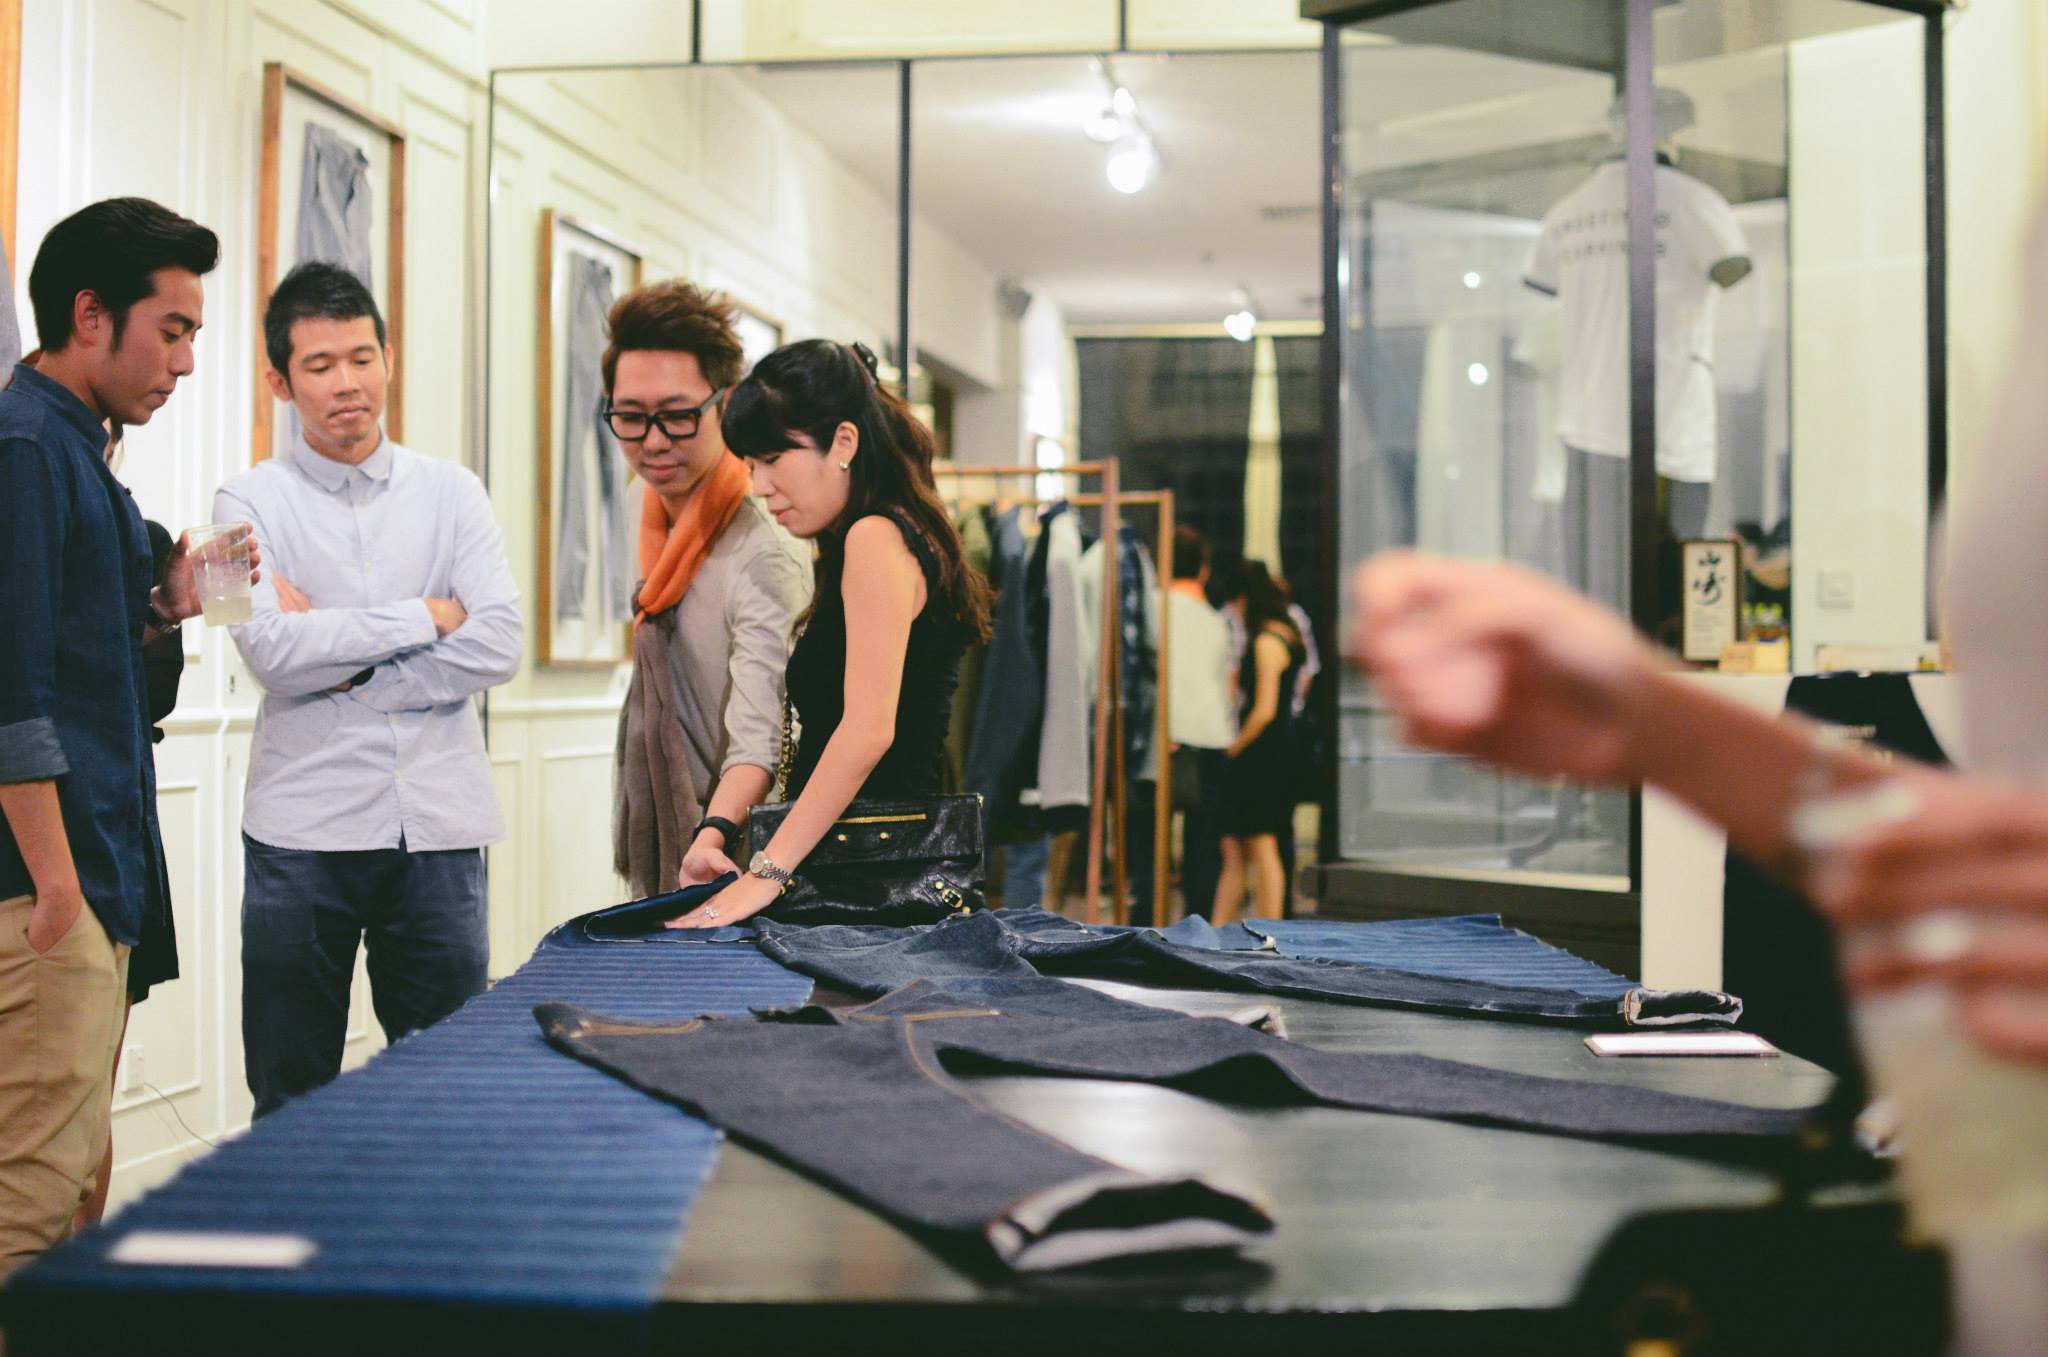 Customers get a feel of the fabric used